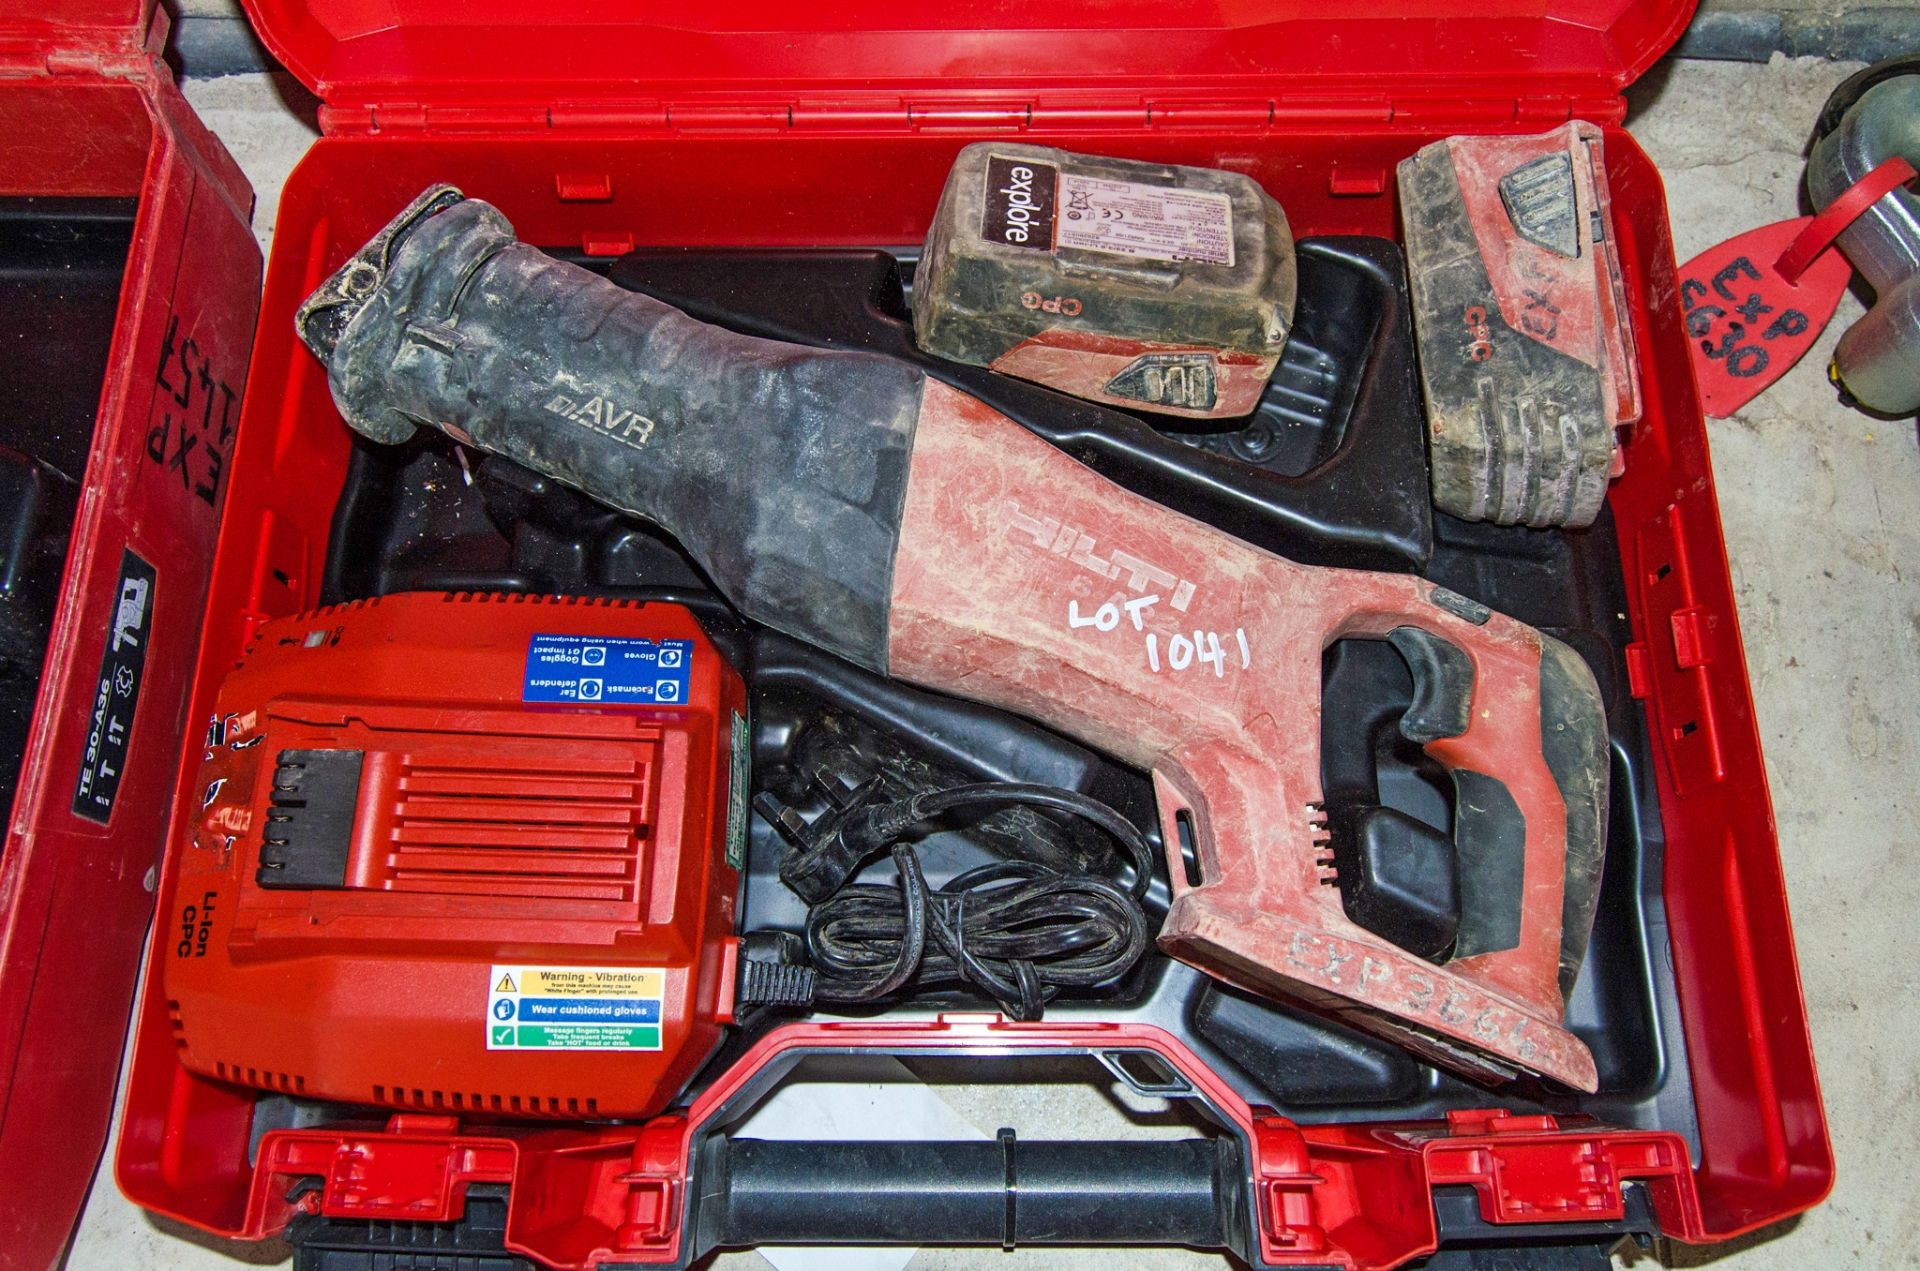 Hilti 6-A22 22v reciprocating saw c/w 2 batteries, charger and carry case EXP3664